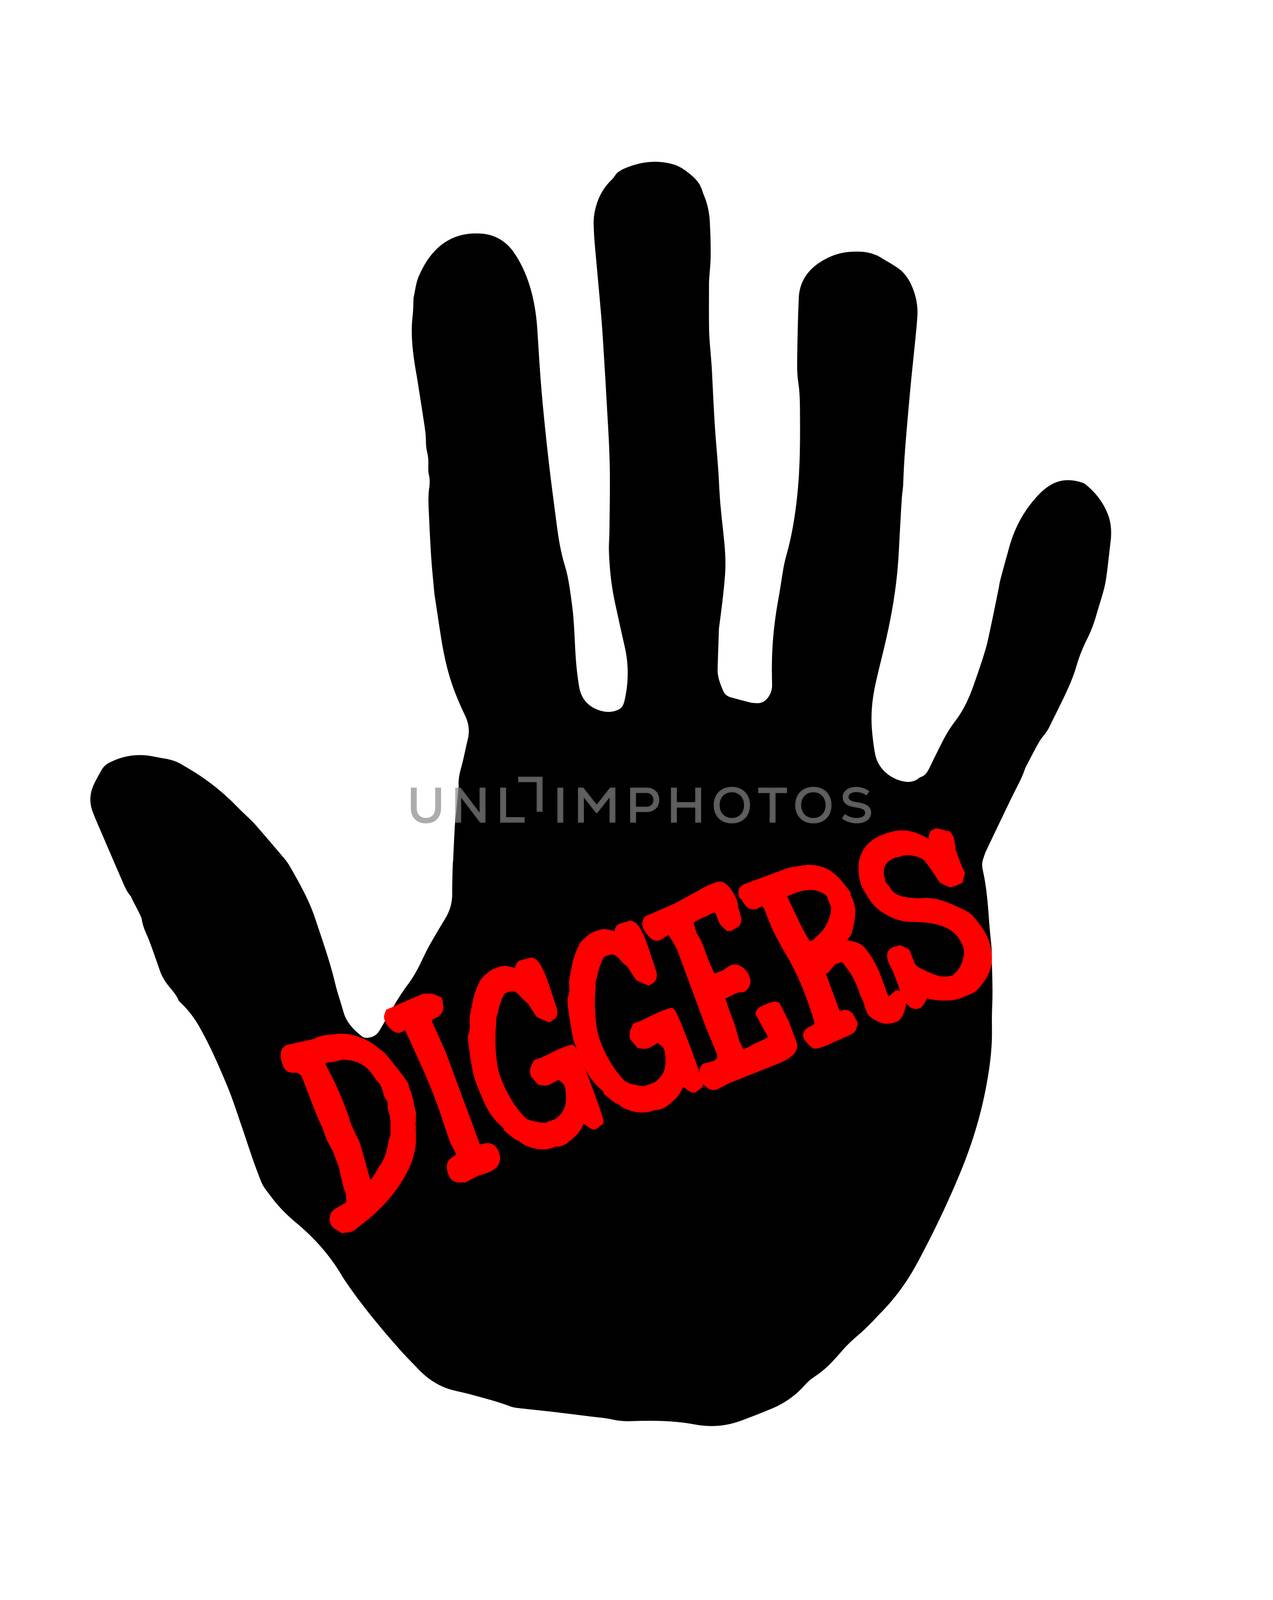 Man handprint isolated on white background showing stop diggers